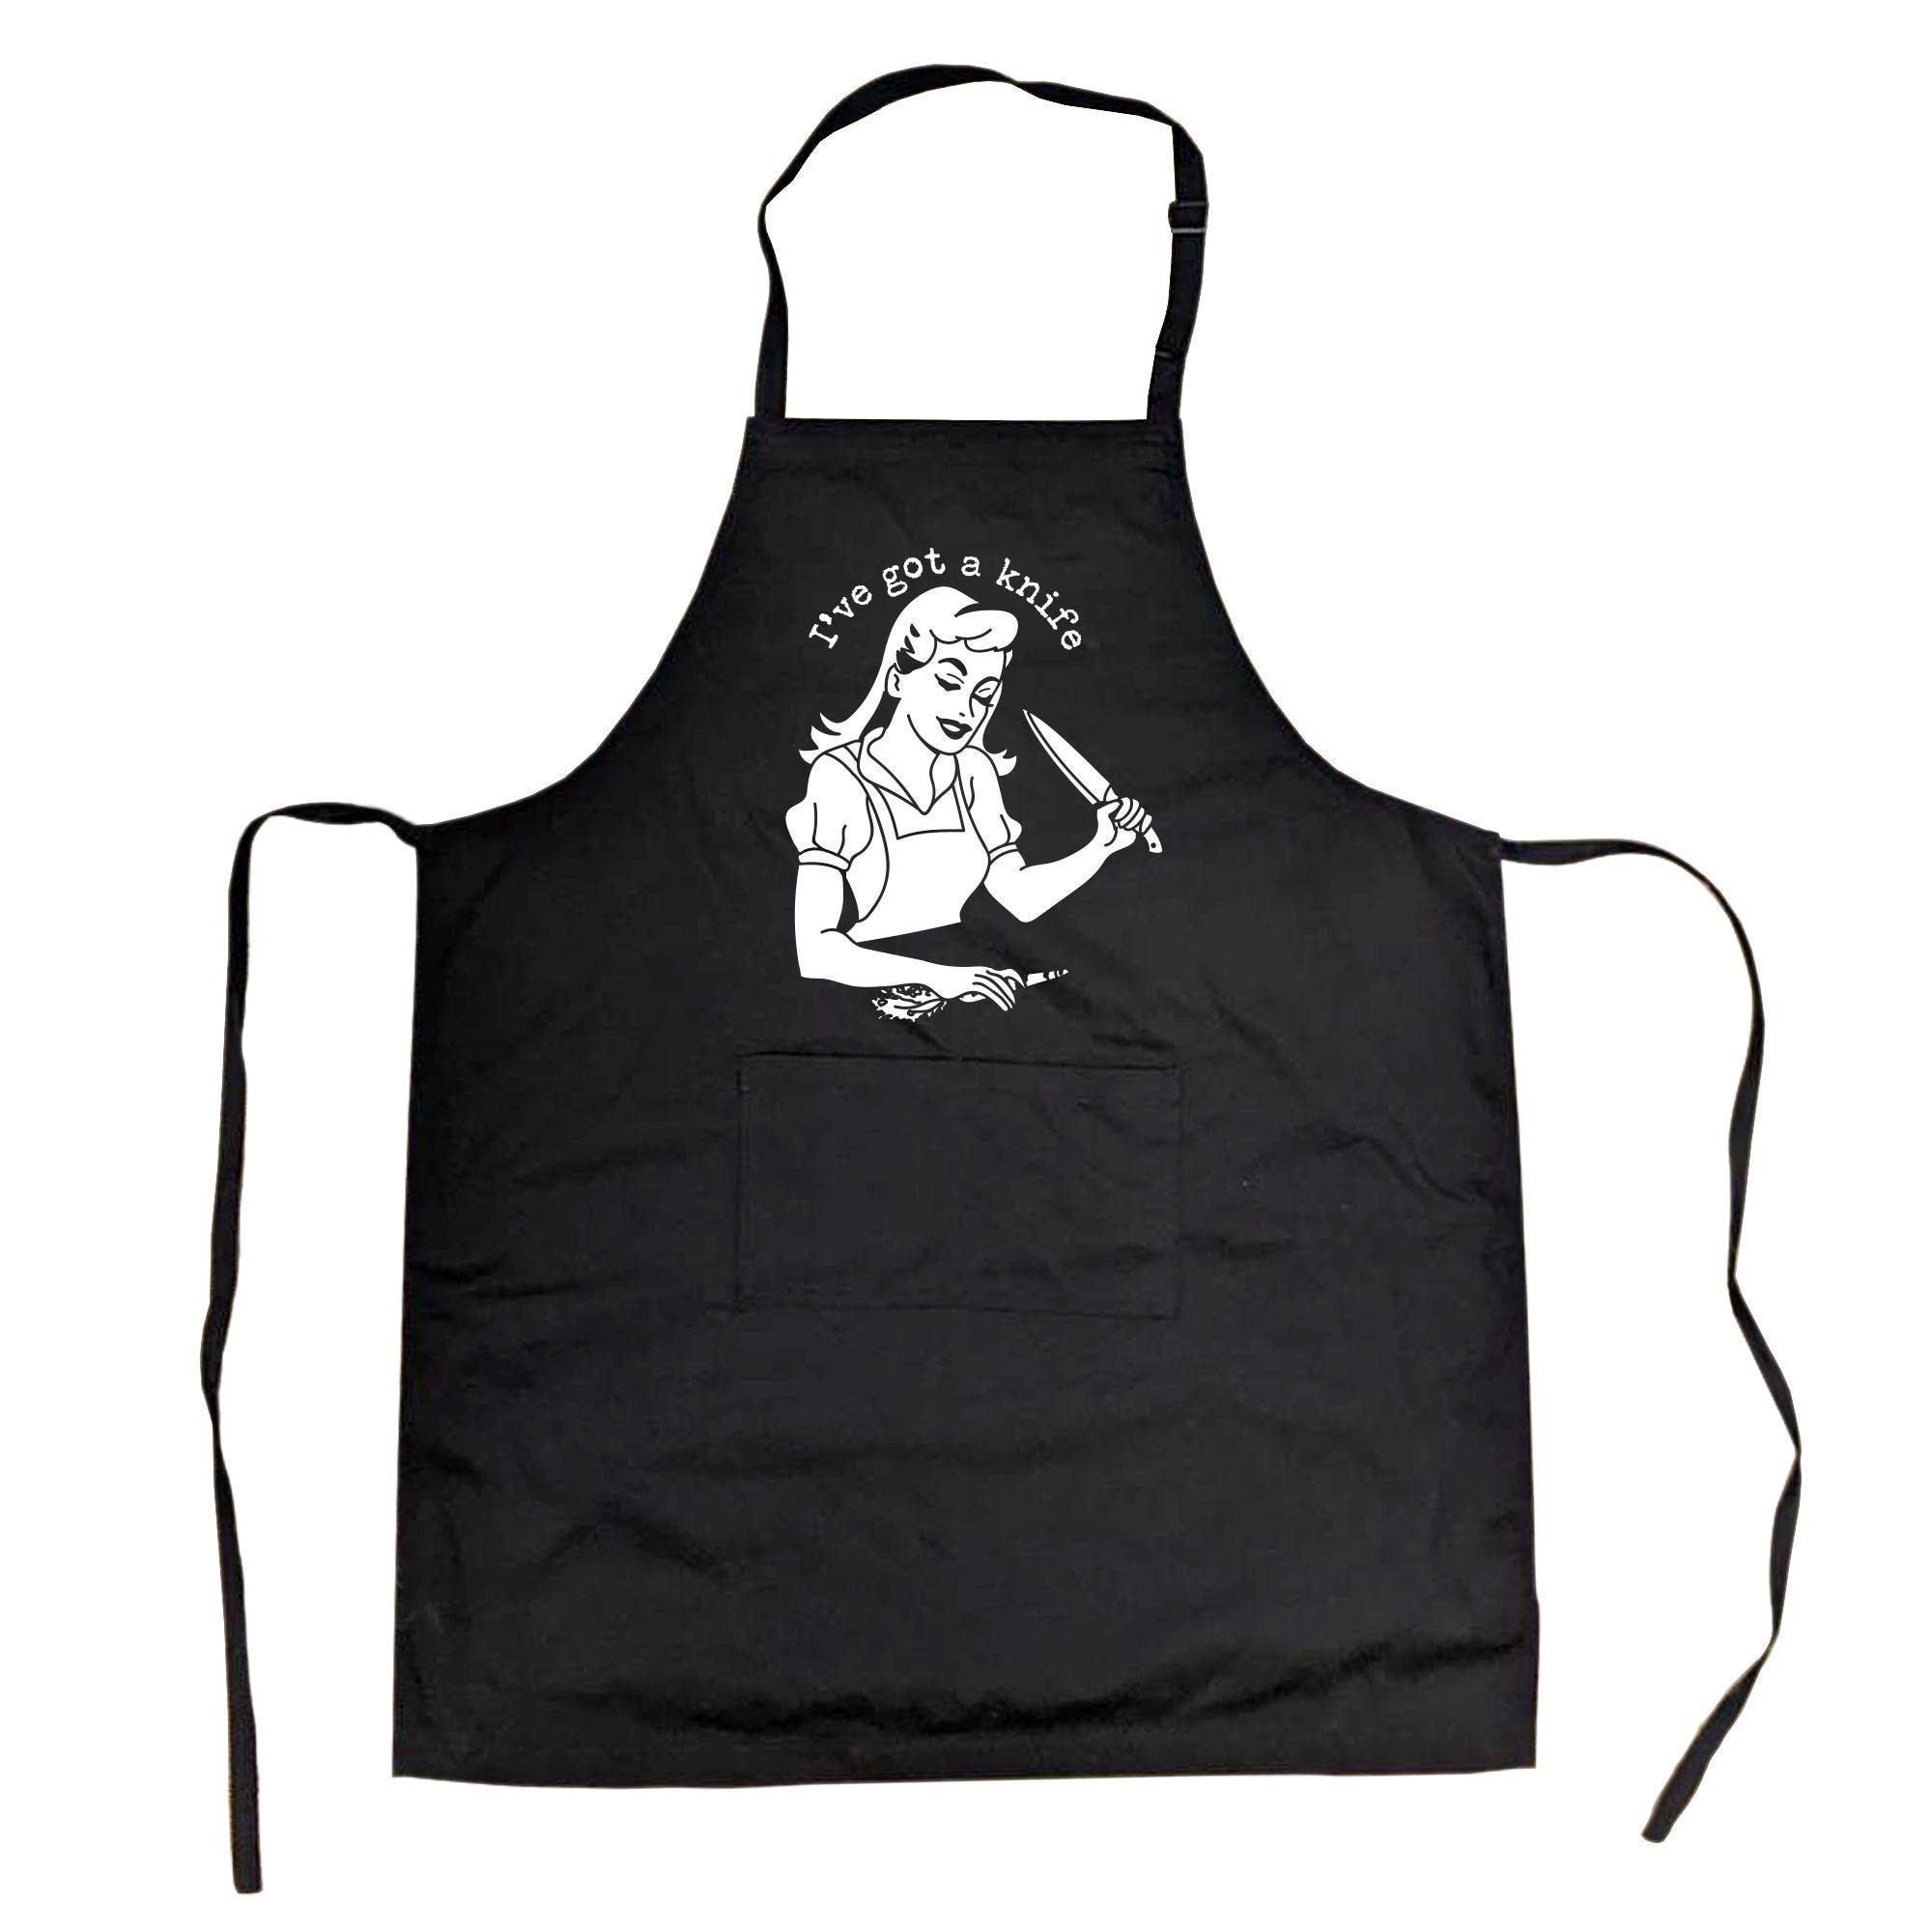 Funny Novelty Apron Kitchen Cooking Fitness Yeah Ill Fitness Whole Cake In My 